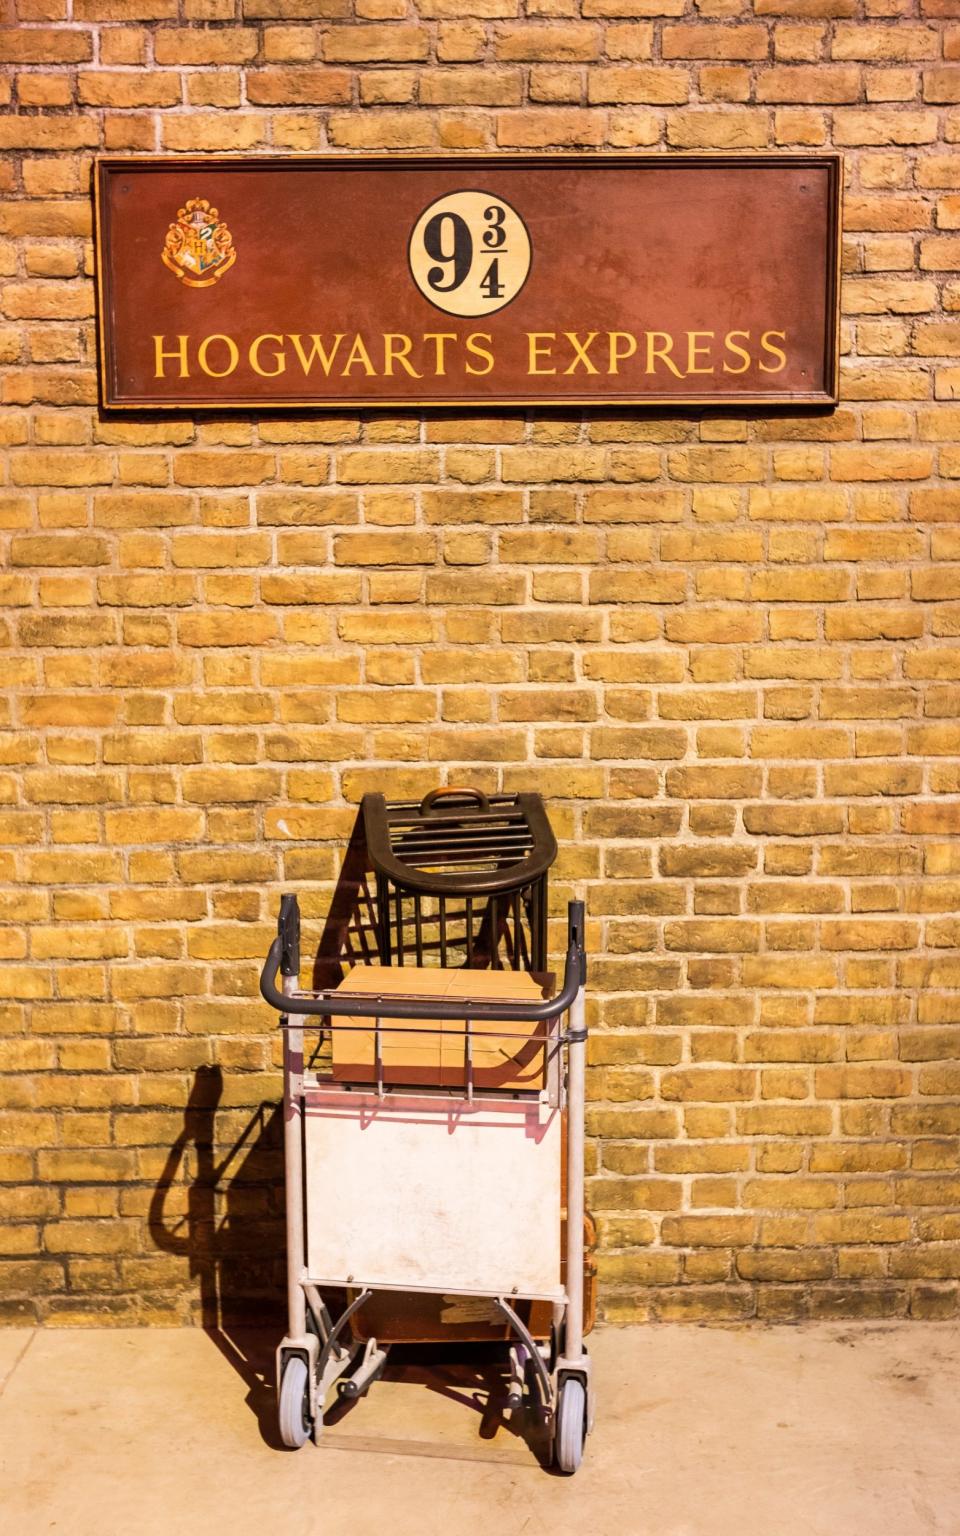 Platform nine and three-quarters is now a permanent fixture at Kings Cross station - iStock